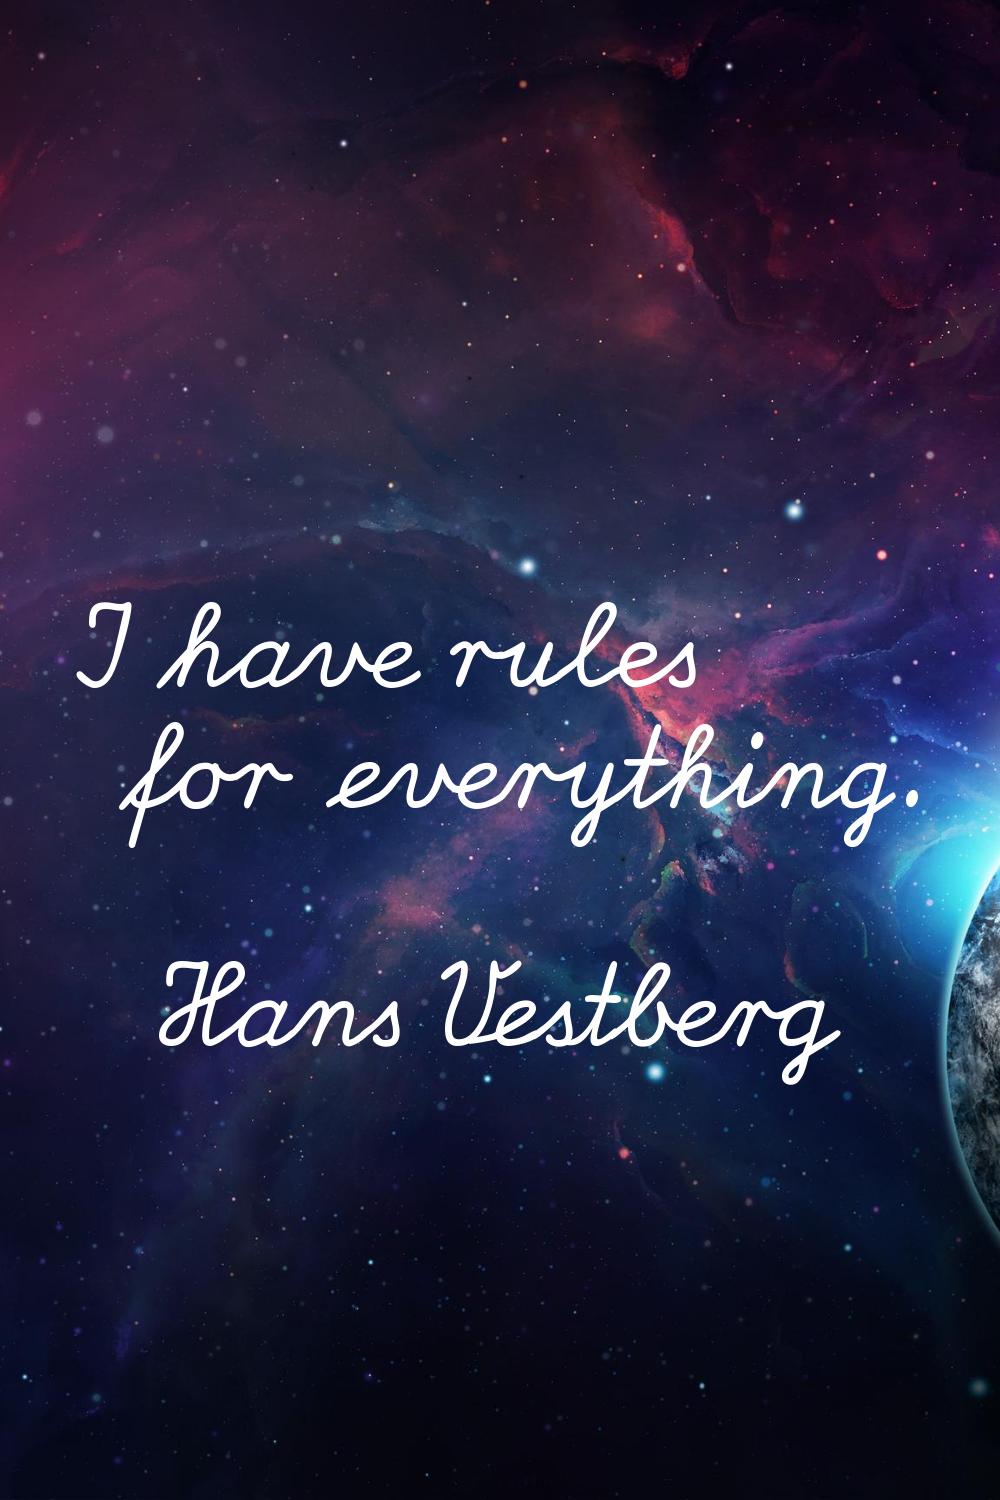 I have rules for everything.